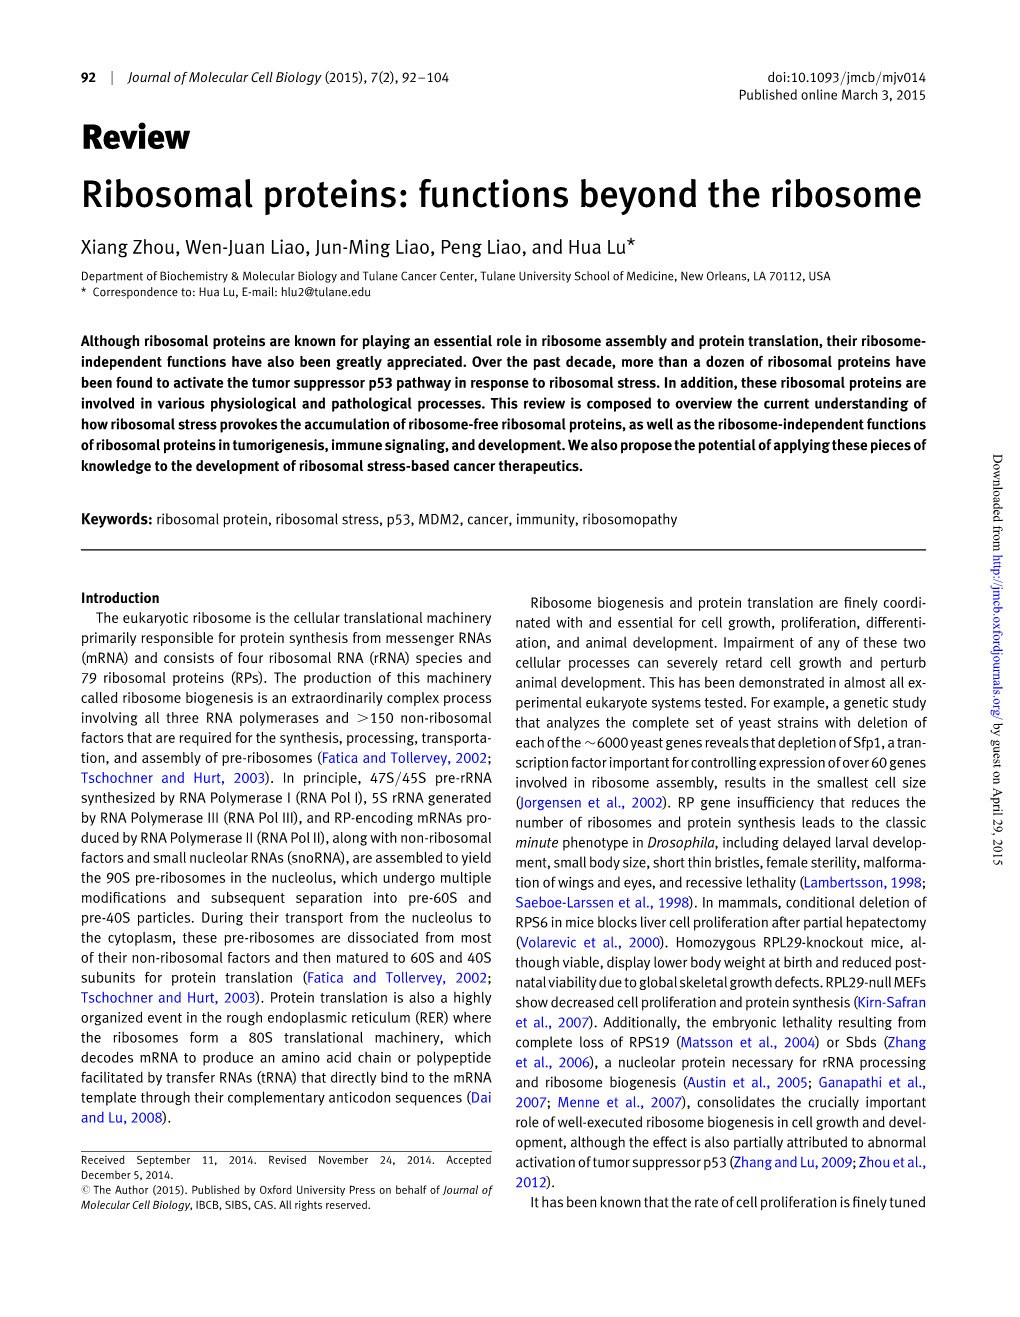 Functions Beyond the Ribosome